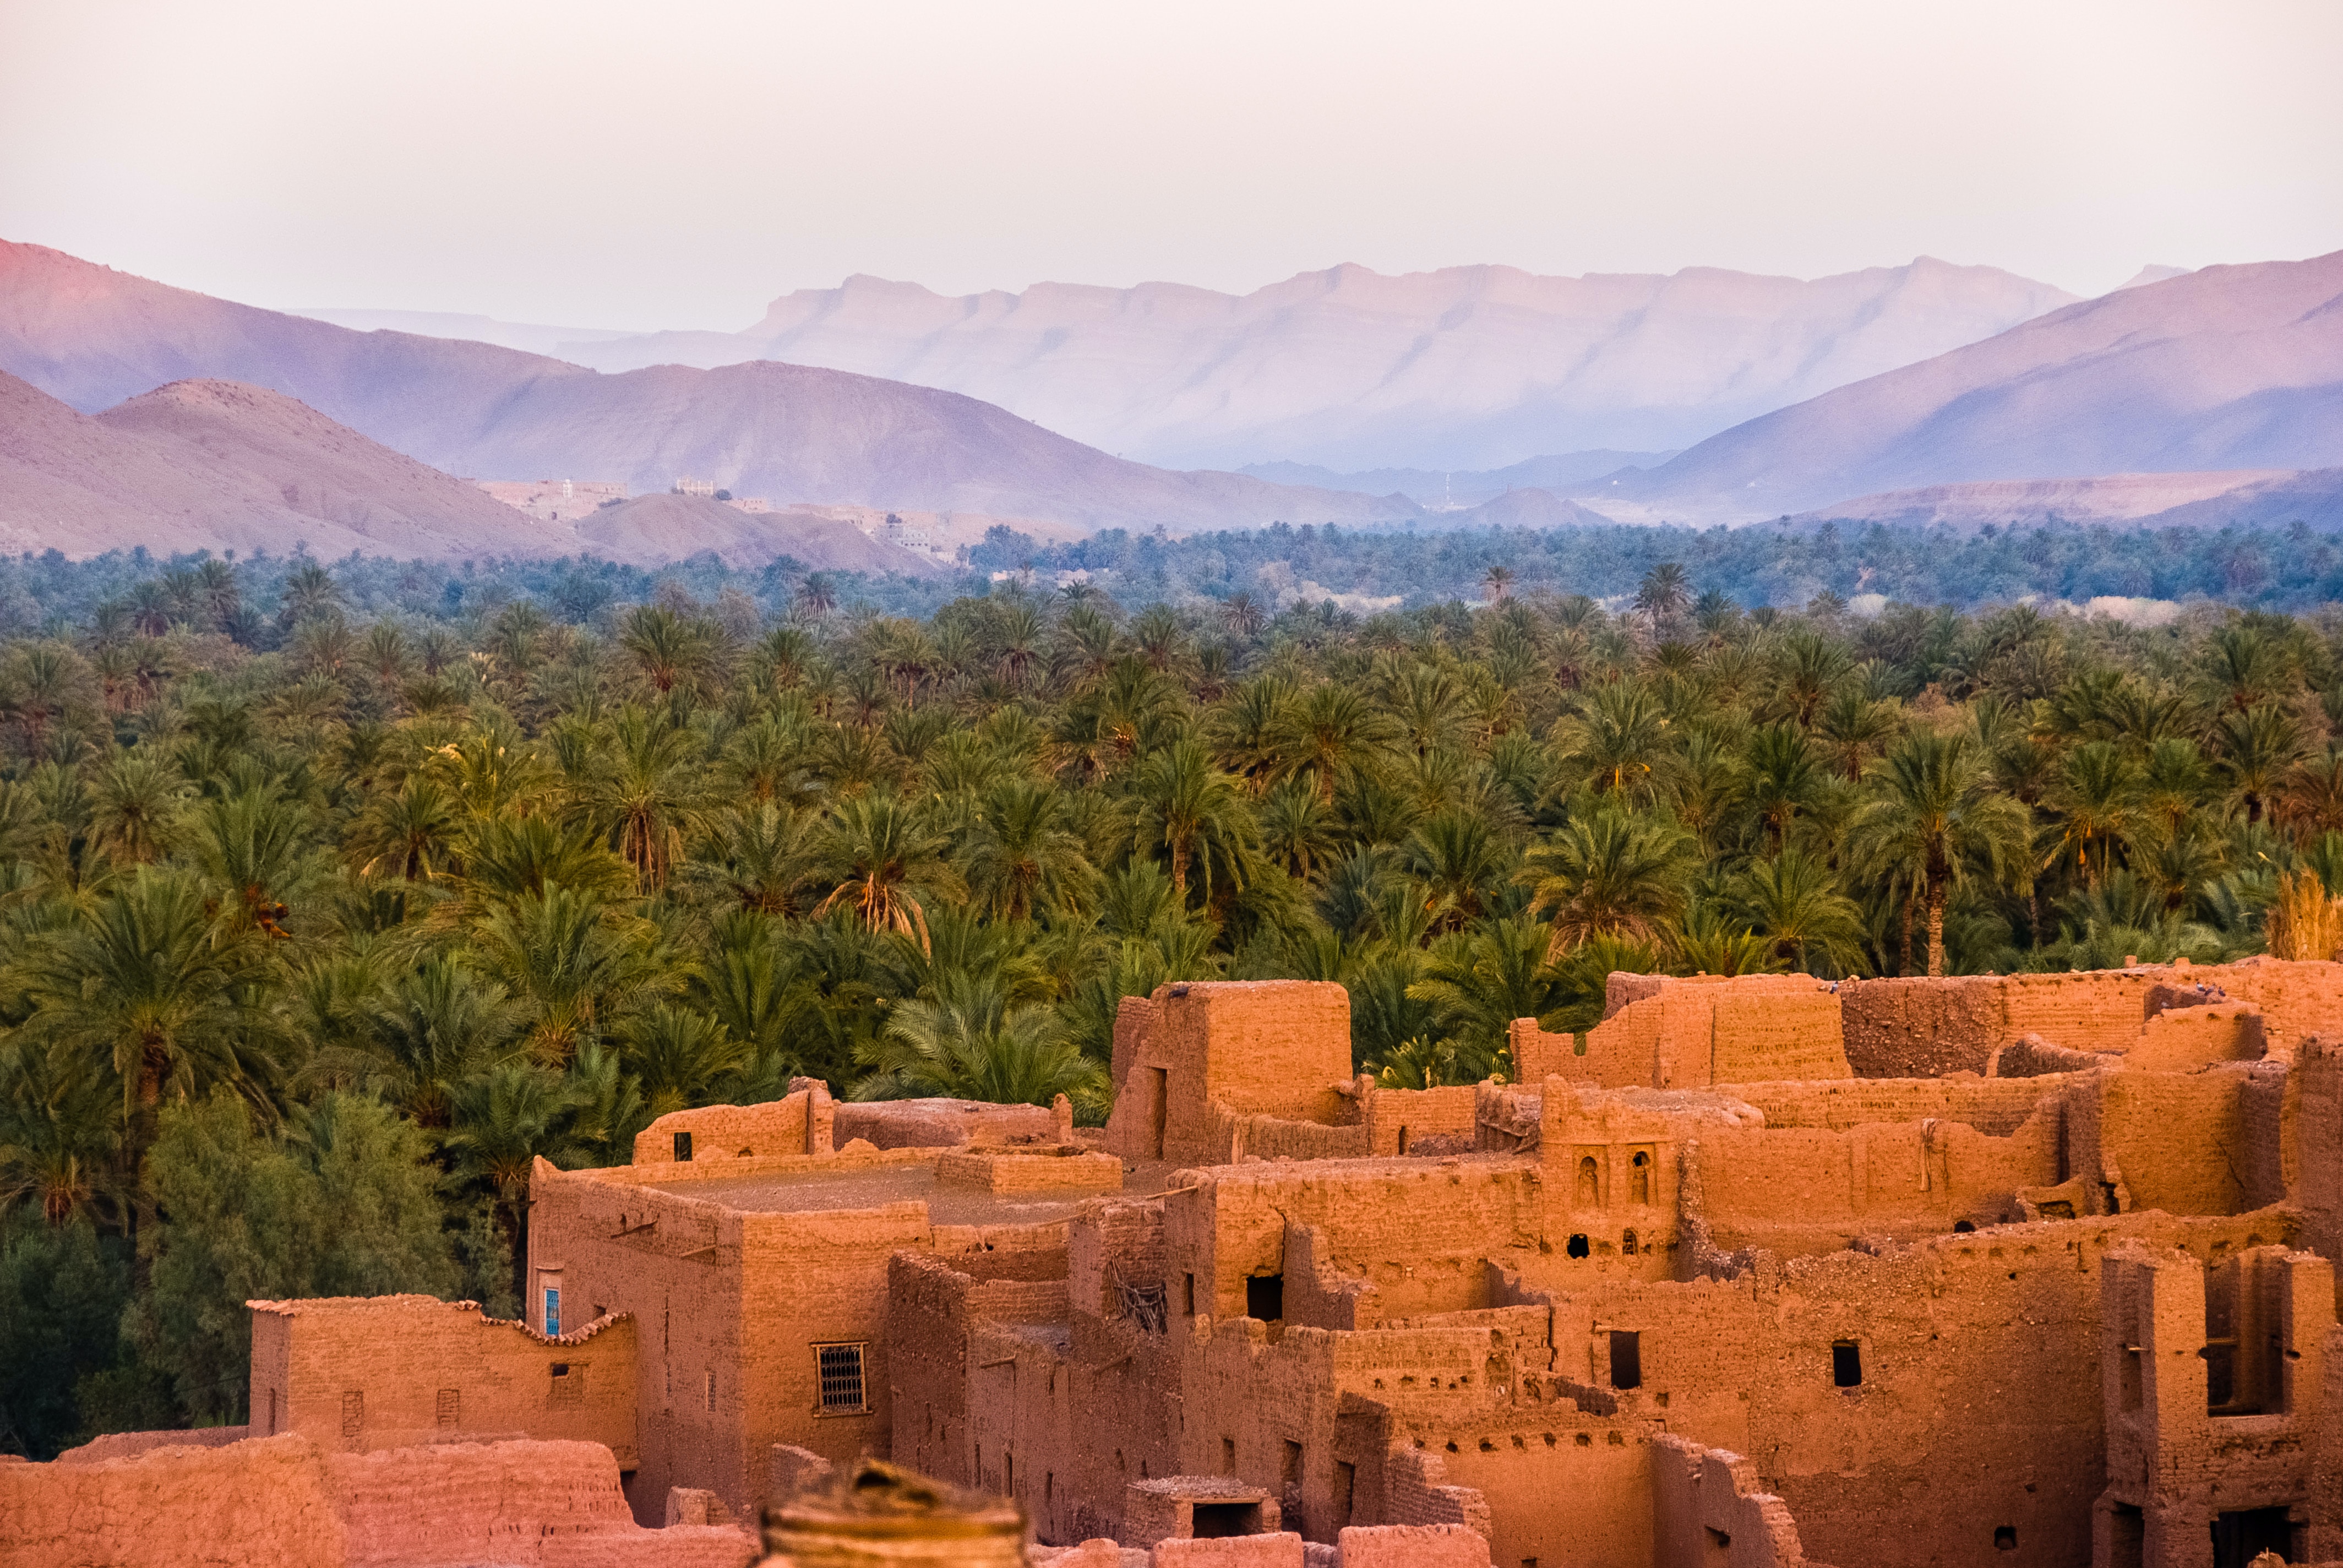 The Morocco and its tourist attractions